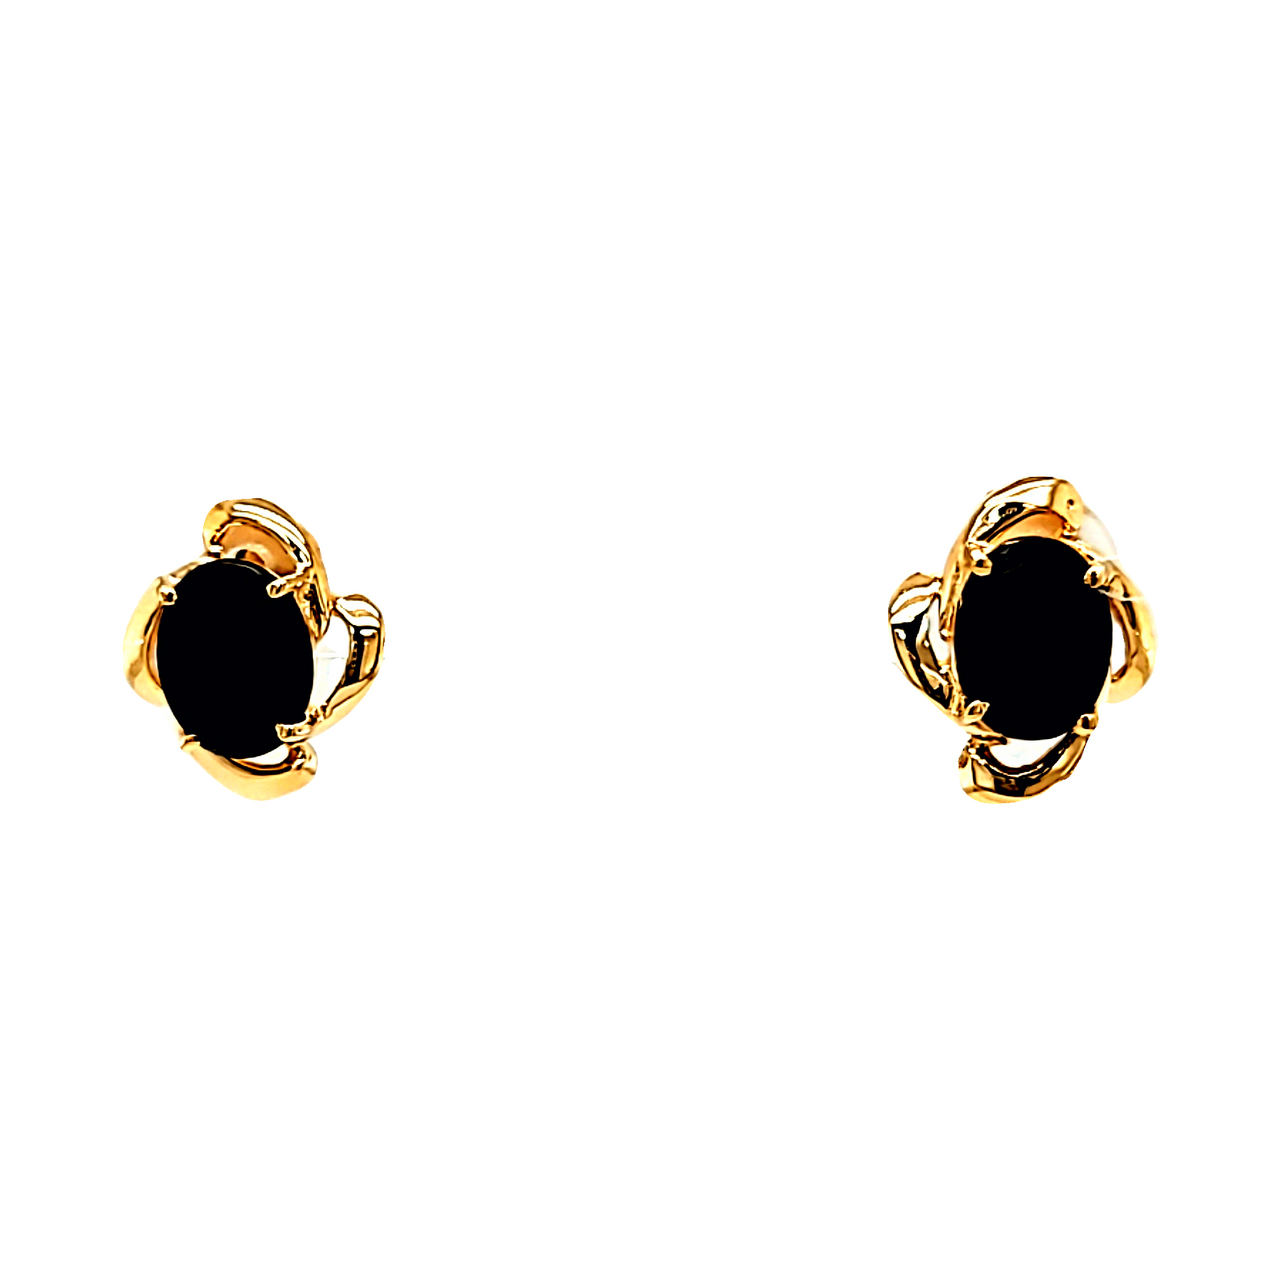 Ever Blossom Earrings, Yellow Gold, Onyx & Diamonds - Jewelry - Categories